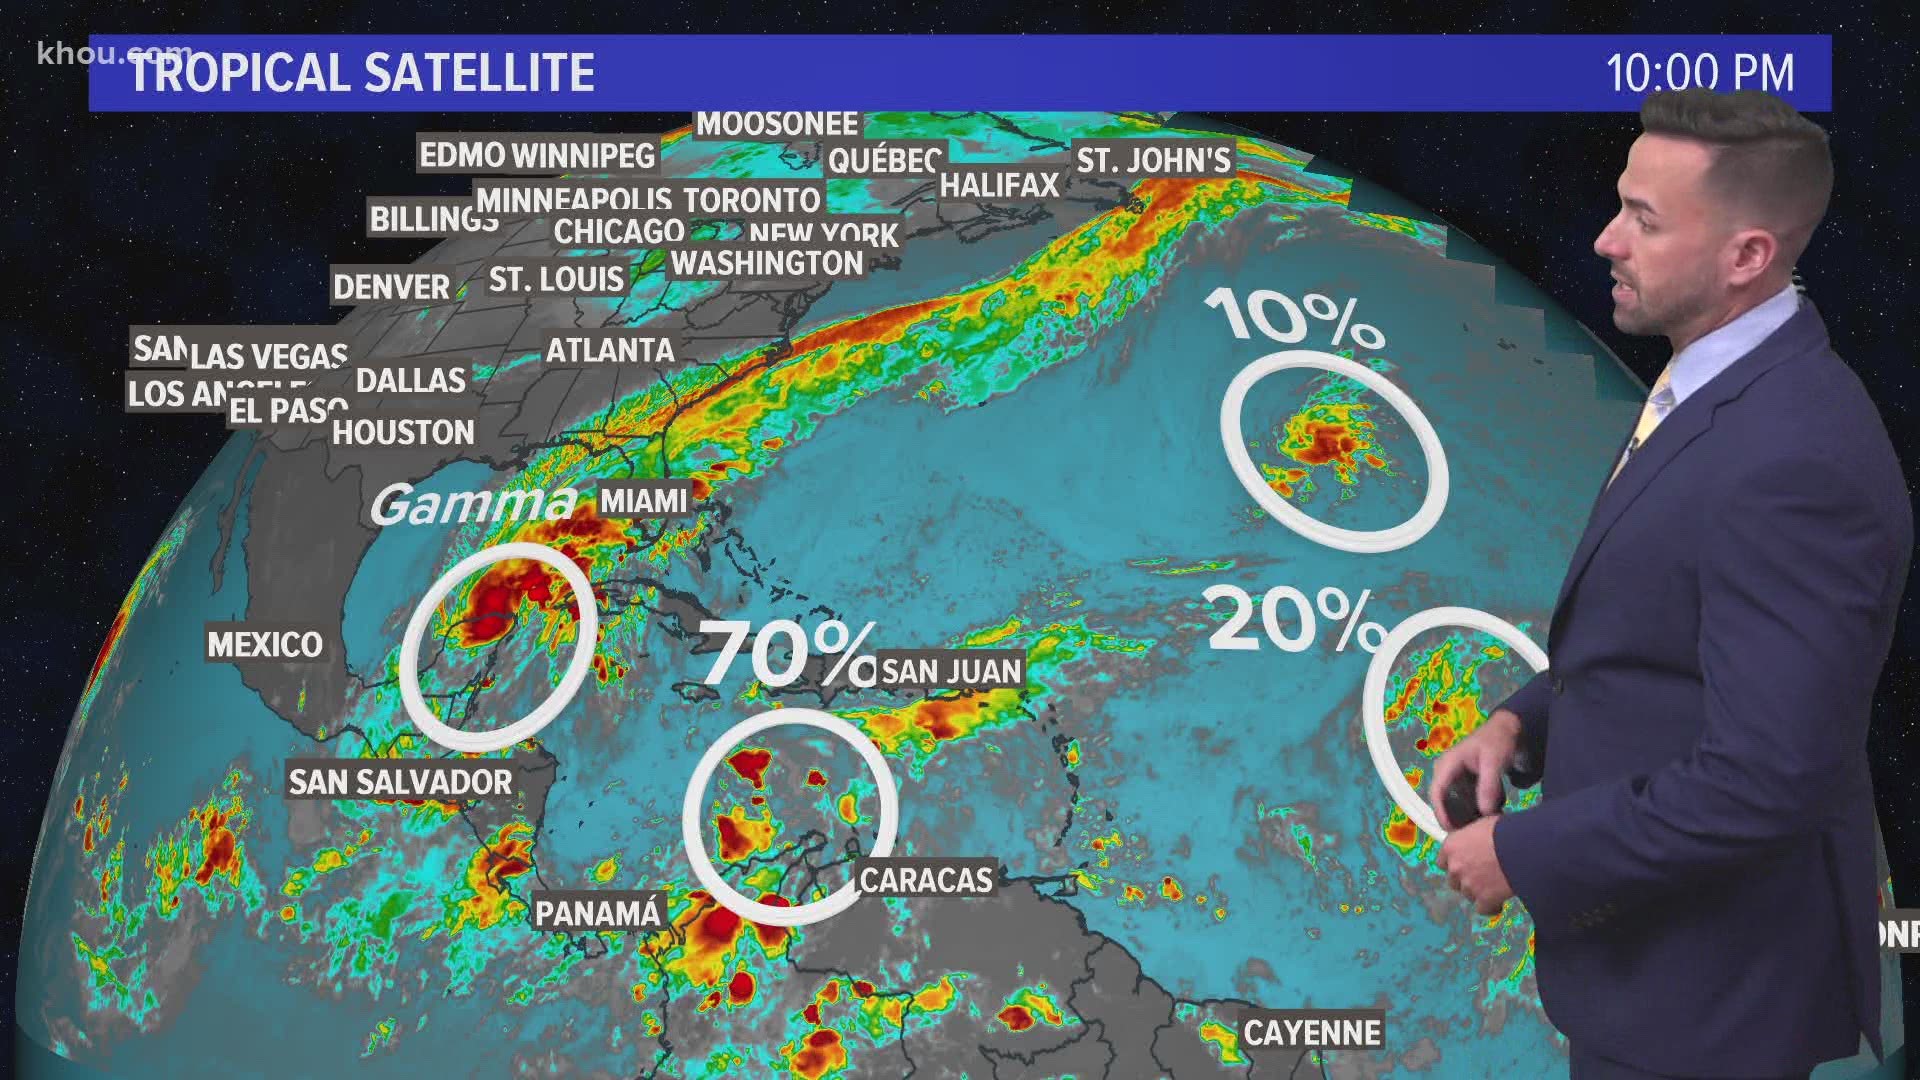 The KHOU 11 Weather Team is watching 4 tropical systems, including Tropical Storm Gamma, which moved into the Yucatan Peninsula Saturday.